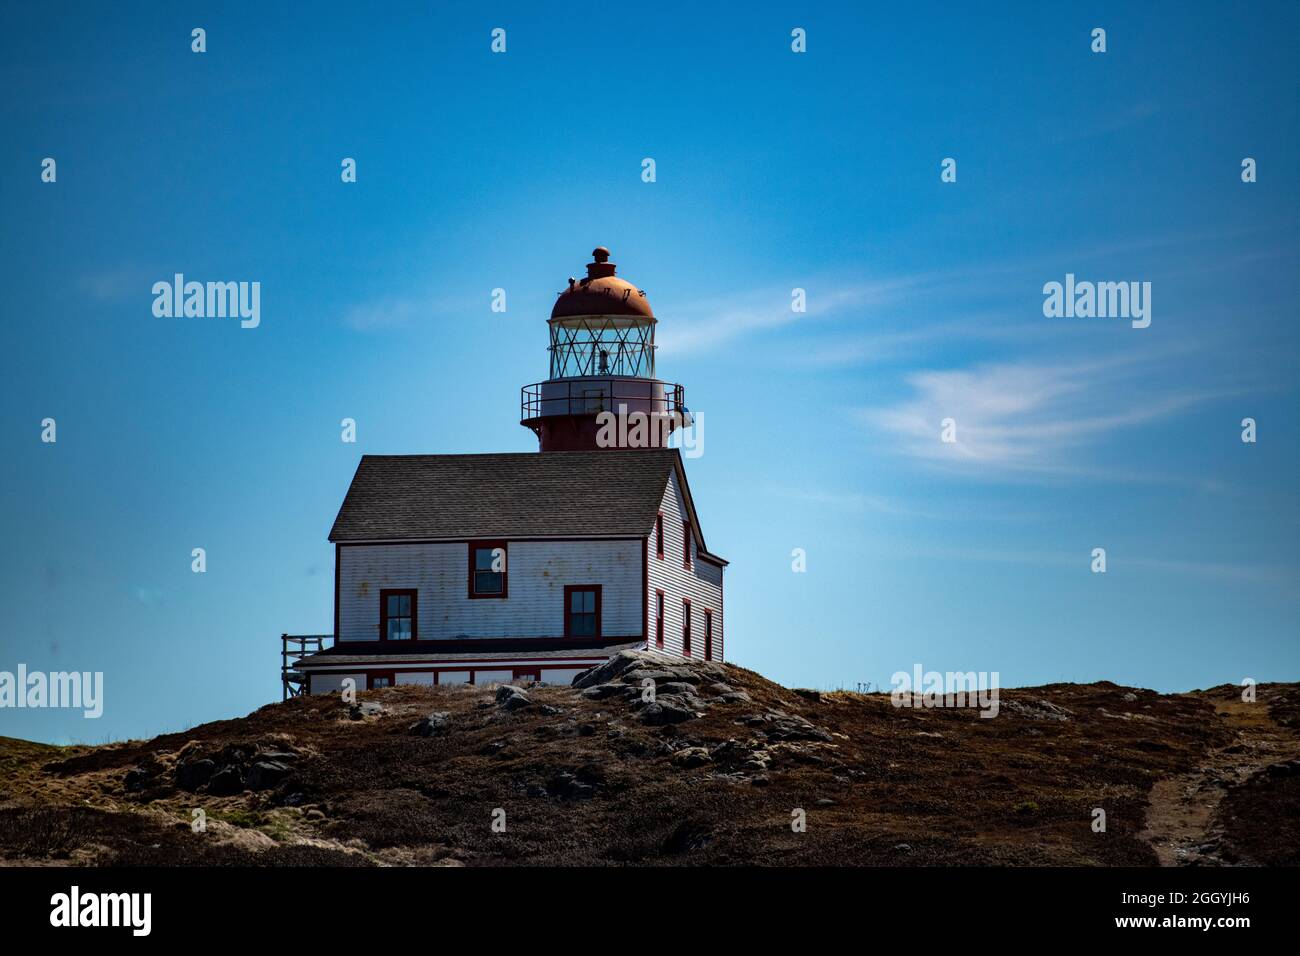 A vintage wood lighthouse and tower with a round red metal roof.  In the center of the lighthouse is a vintage lamp made of multiple pieces of glass. Stock Photo